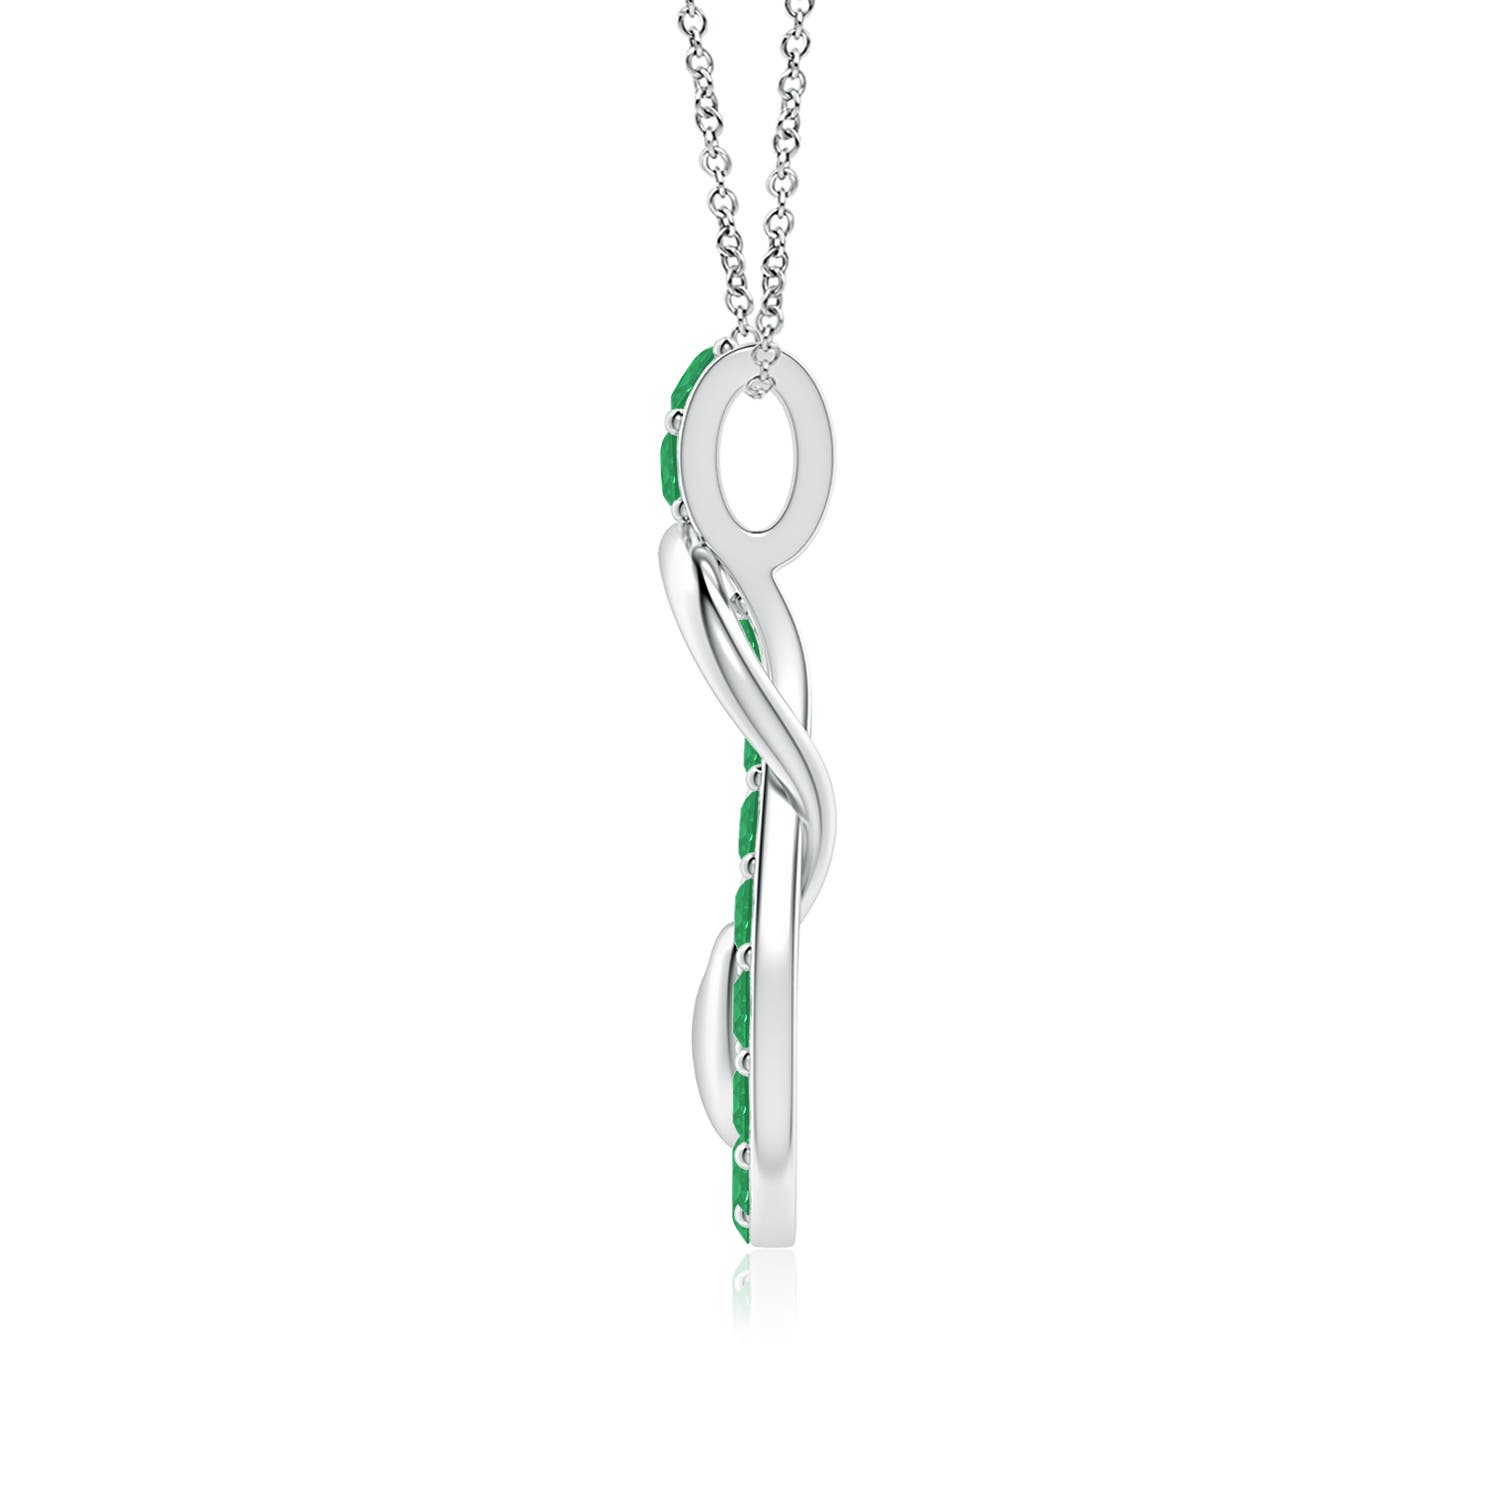 A - Emerald / 1.9 CT / 14 KT White Gold